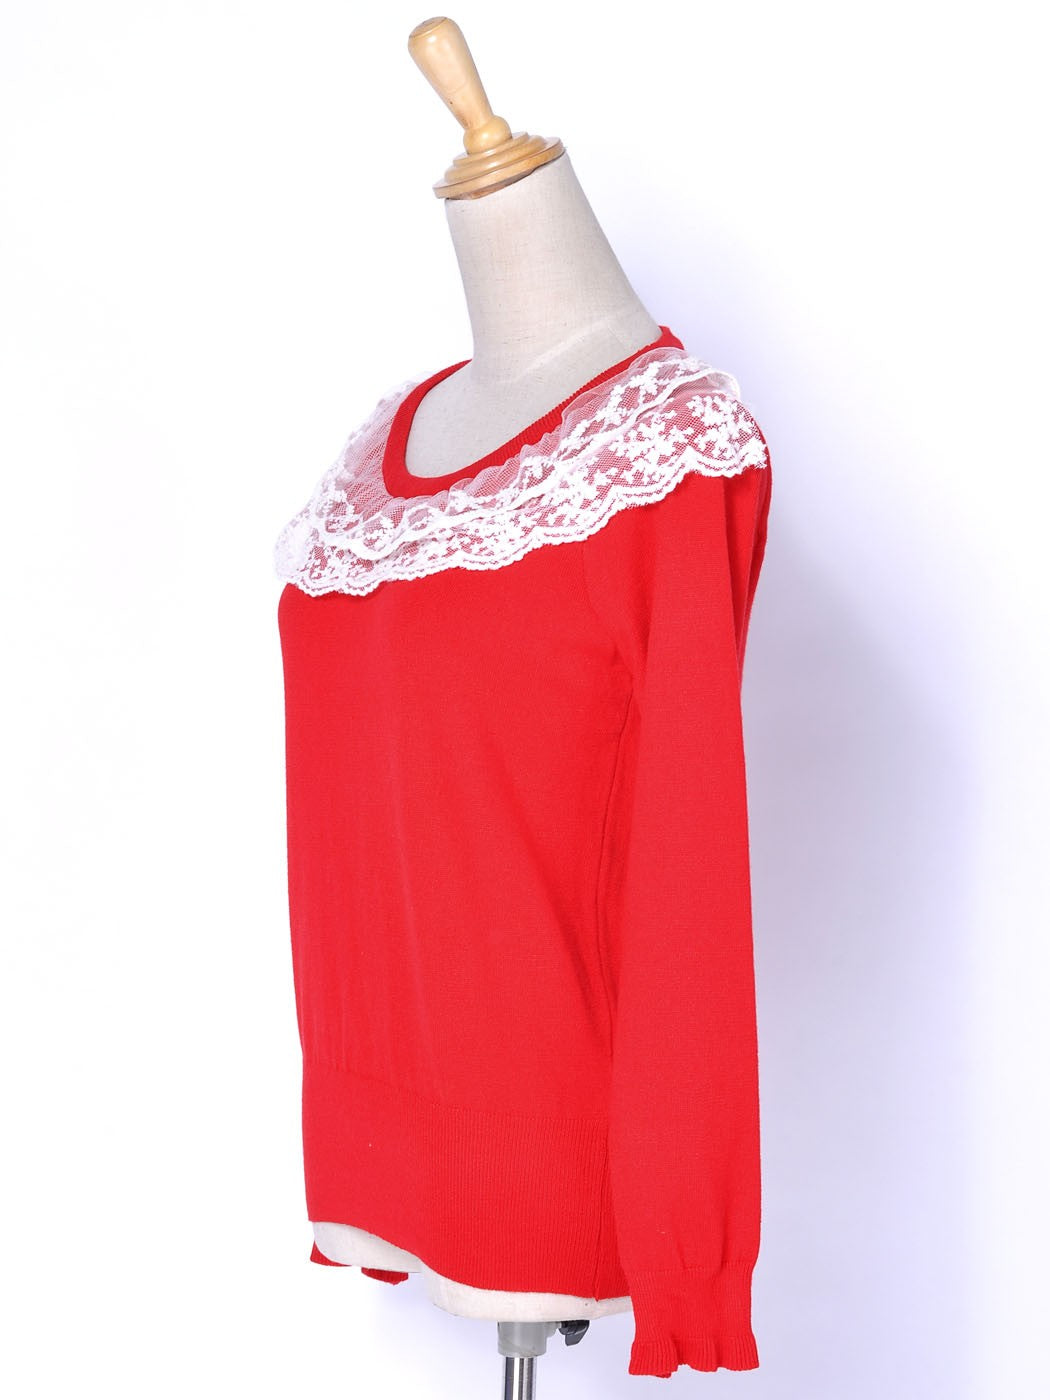 S/M Fit Bright Red Knit L/S Sweater w Lace Embroidered Collar Details